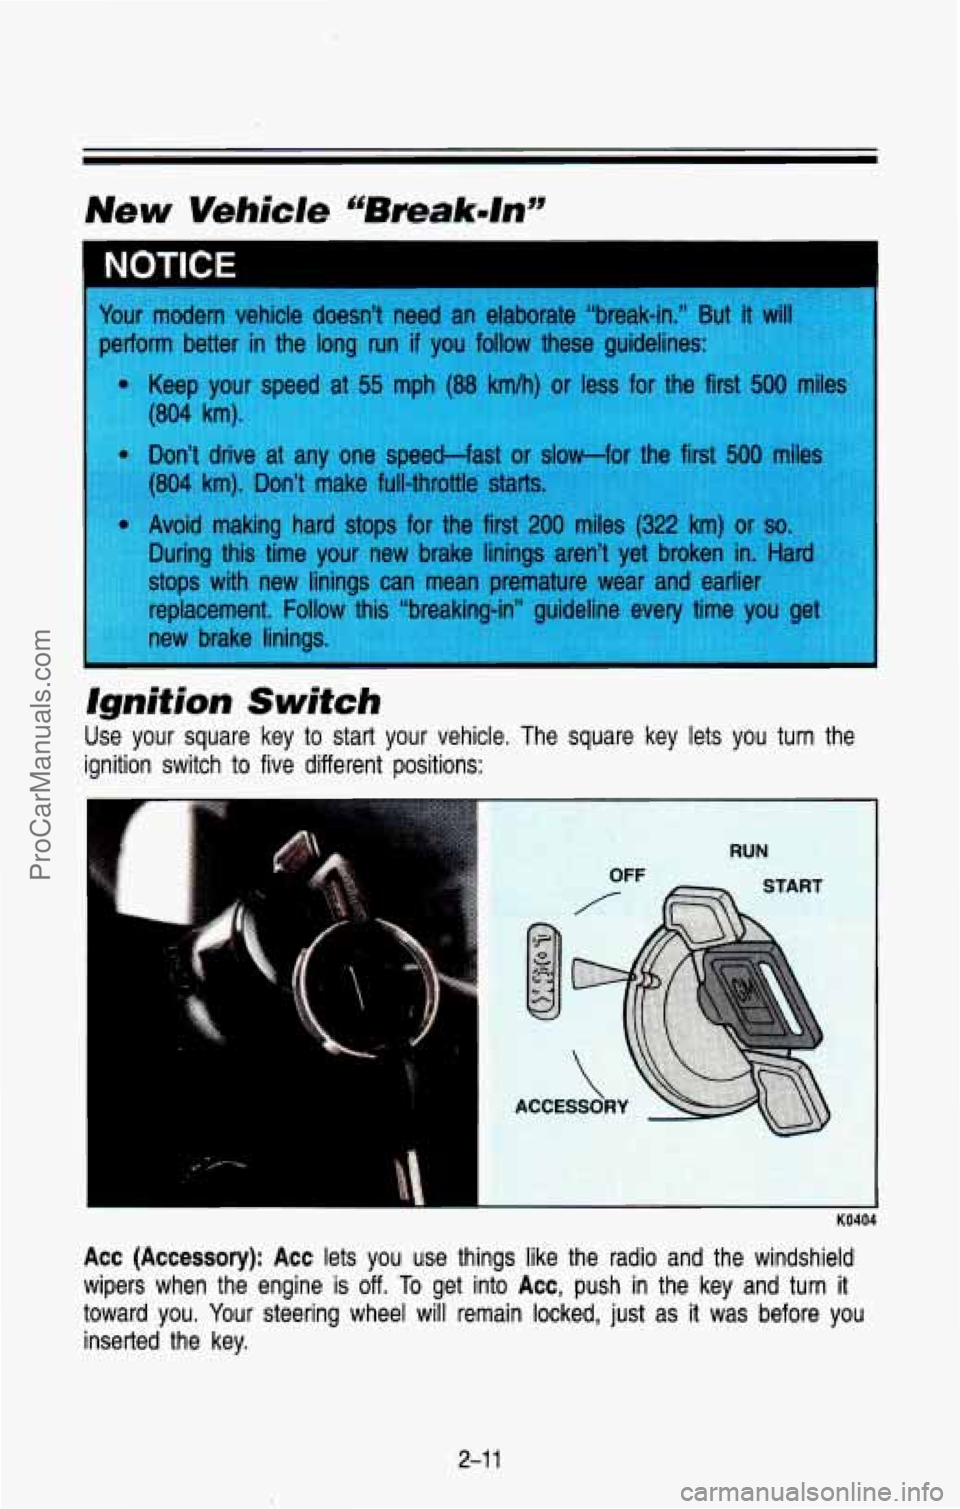 CHEVROLET SUBURBAN 1993  Owners Manual Ignition  Switch 
Use  your  square  key to start  your  vehicle.  The  square  key  lets  you  turn  the 
ignition  switch  to five  different  positions: 
Acc  (Accessory):  Acc lets  you  use  thin